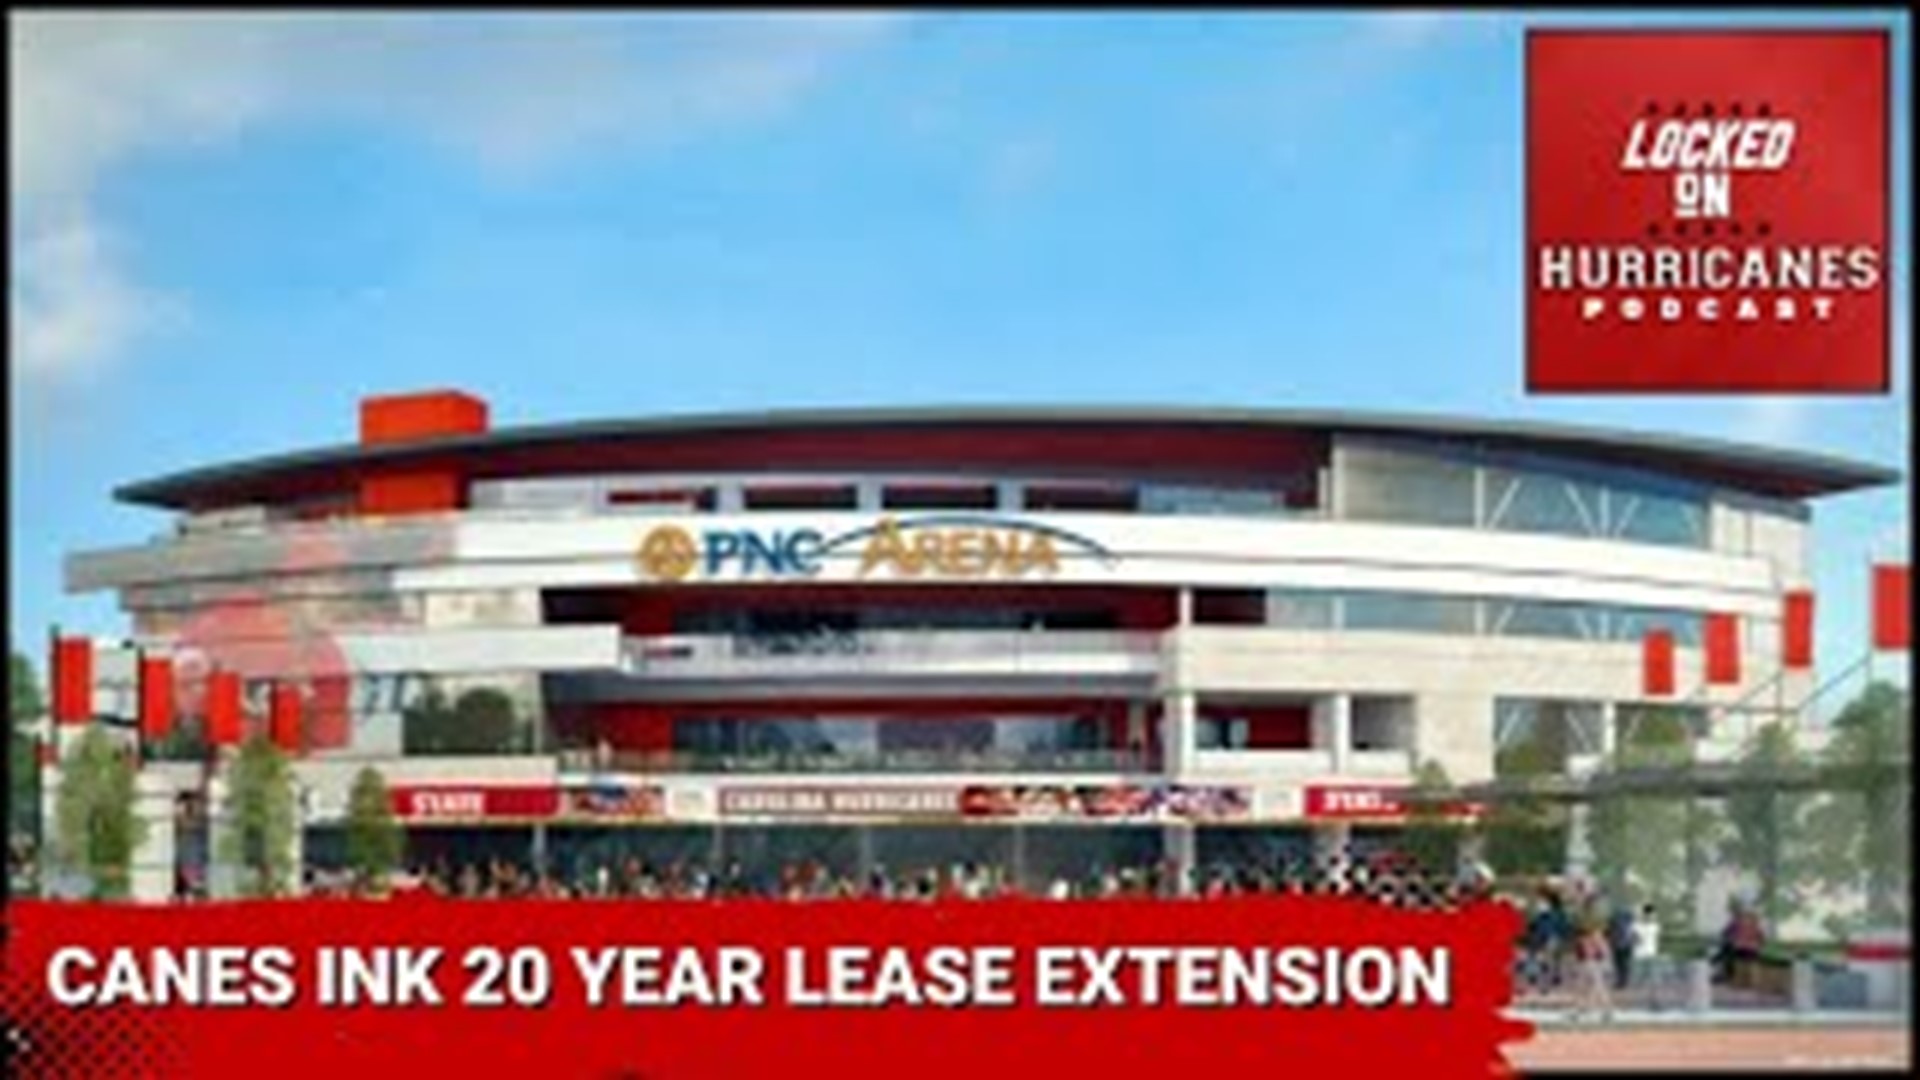 The agreement comes with major renovation plans for PNC Arena. That and more on Locked On Hurricanes.